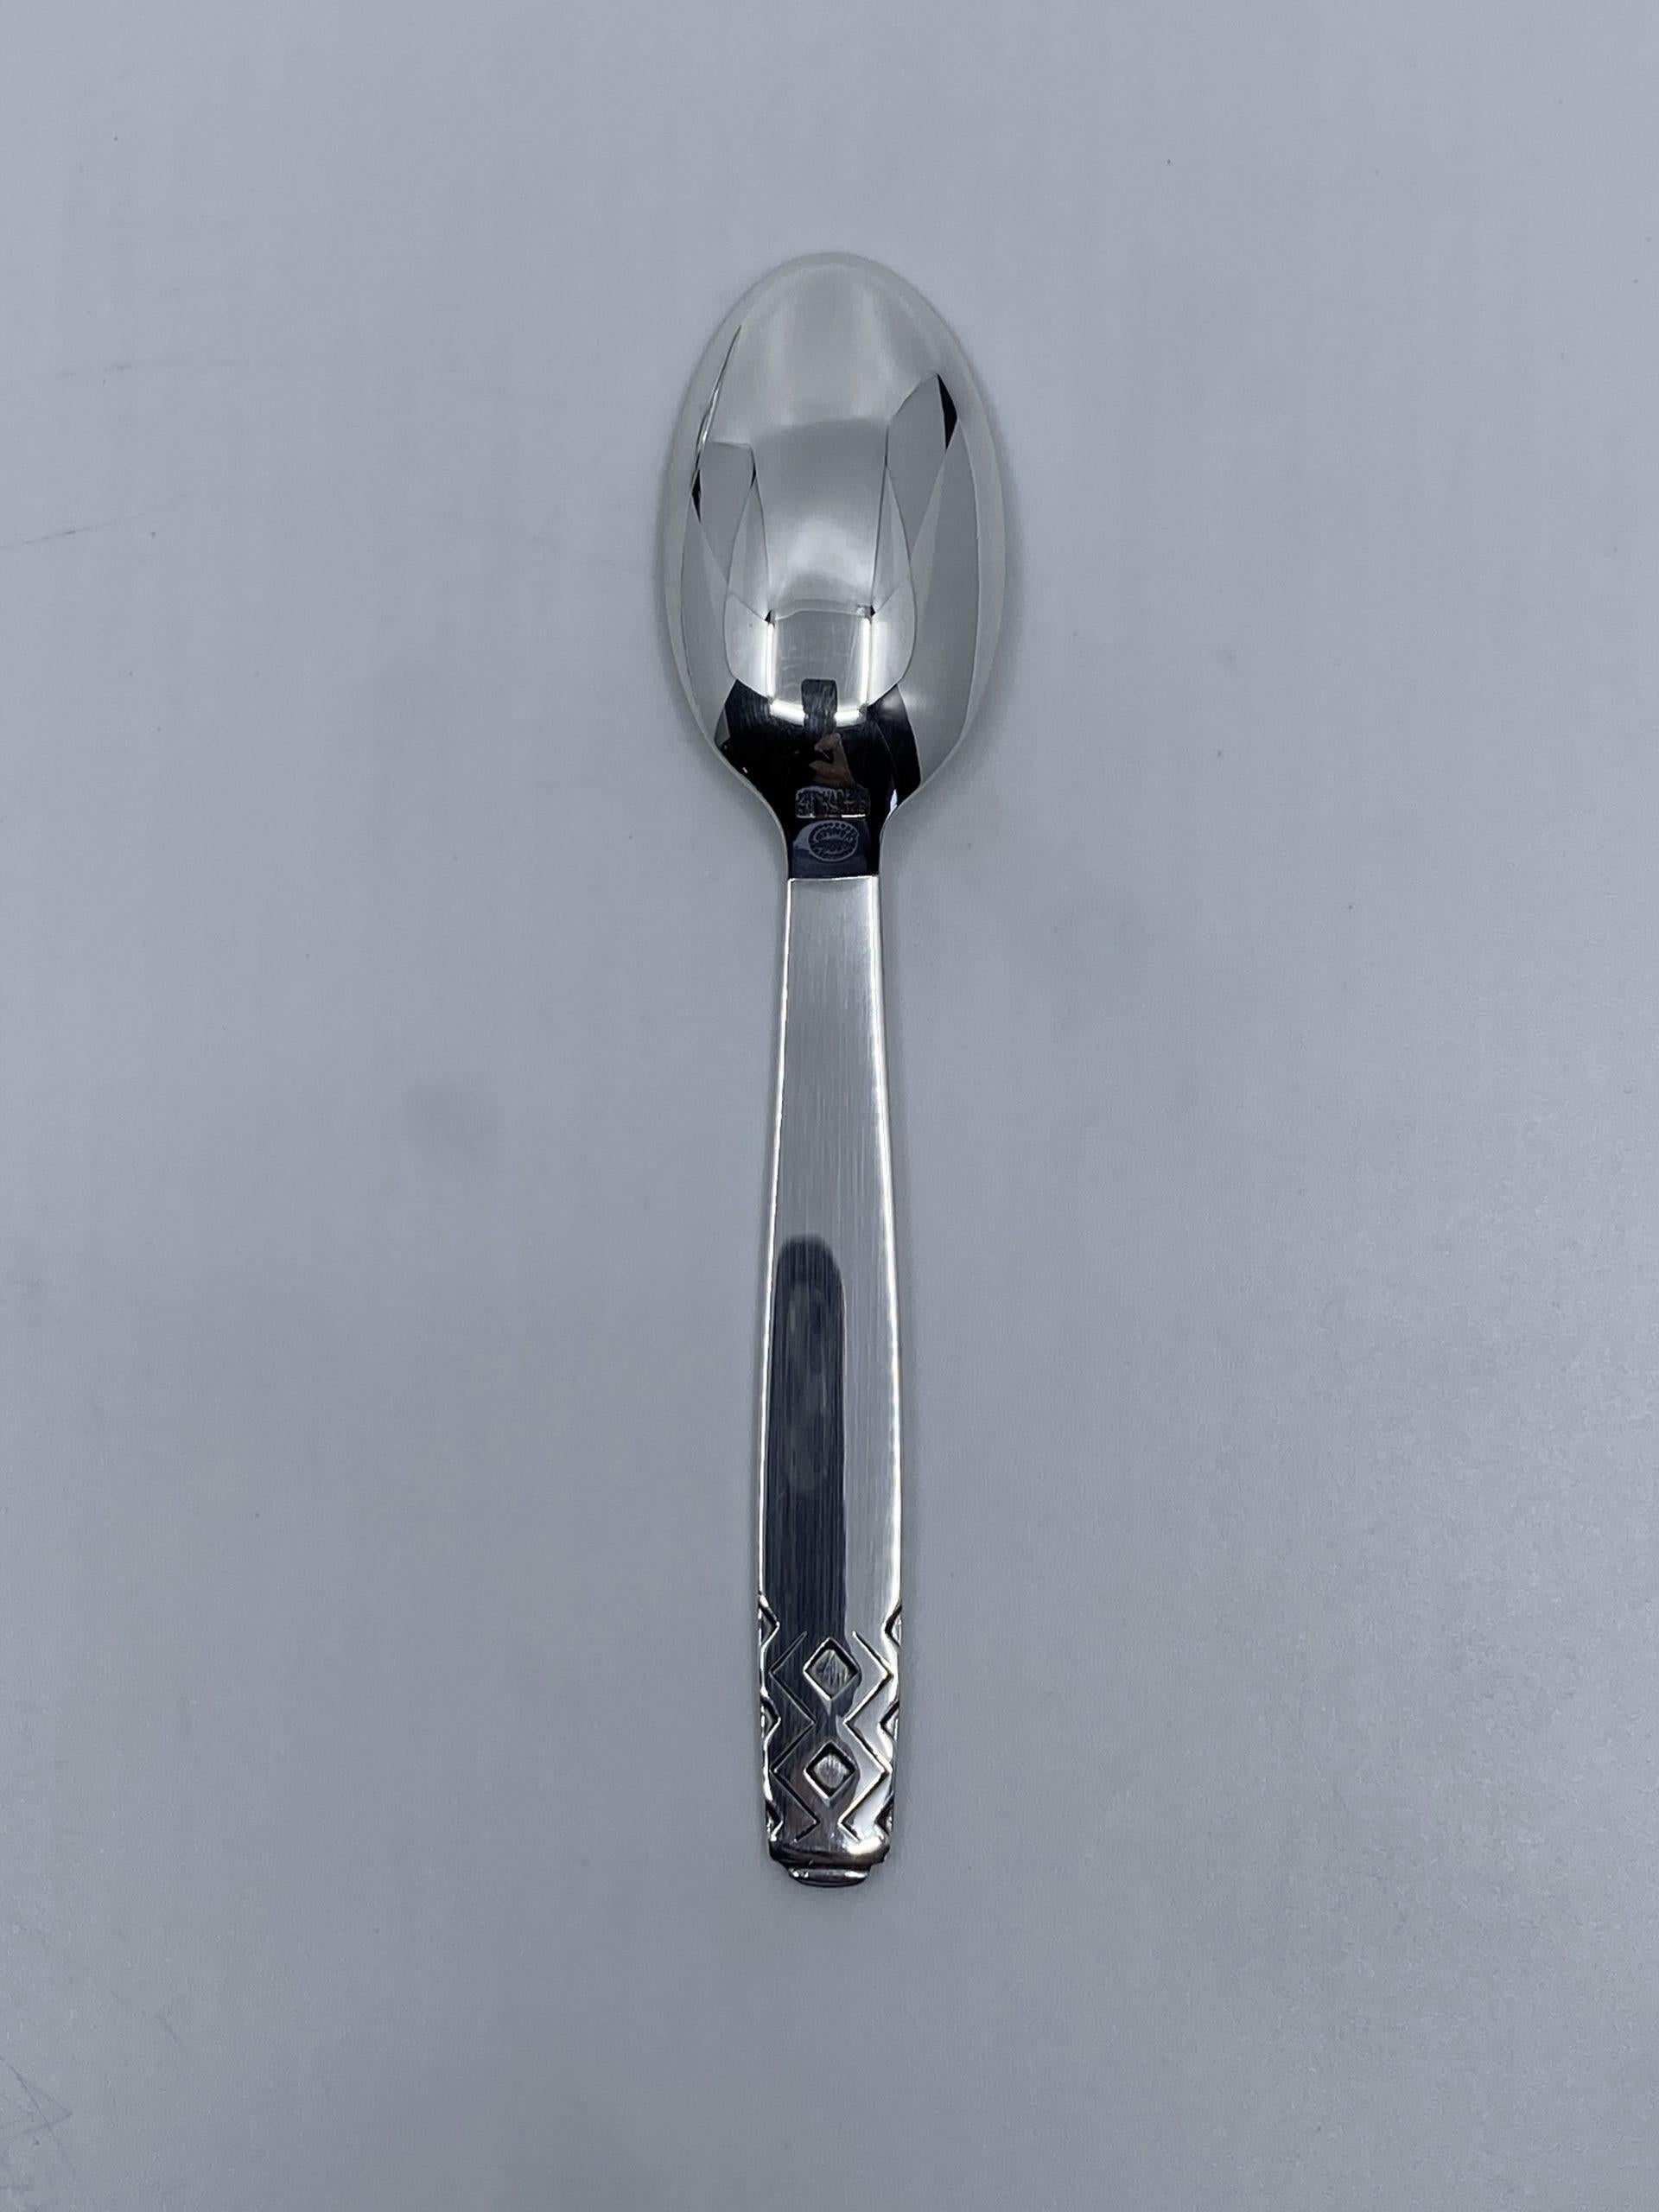 Sterling silver Georg Jensen small teaspoon, item 033 in the Mayan Pattern, design #56 by Johan Rohde from 1937.

Additional information:
Material: Sterling silver
Styles: Art Deco
Hallmarks: With Georg Jensen hallmark, made in Denmark.
Dimensions: 